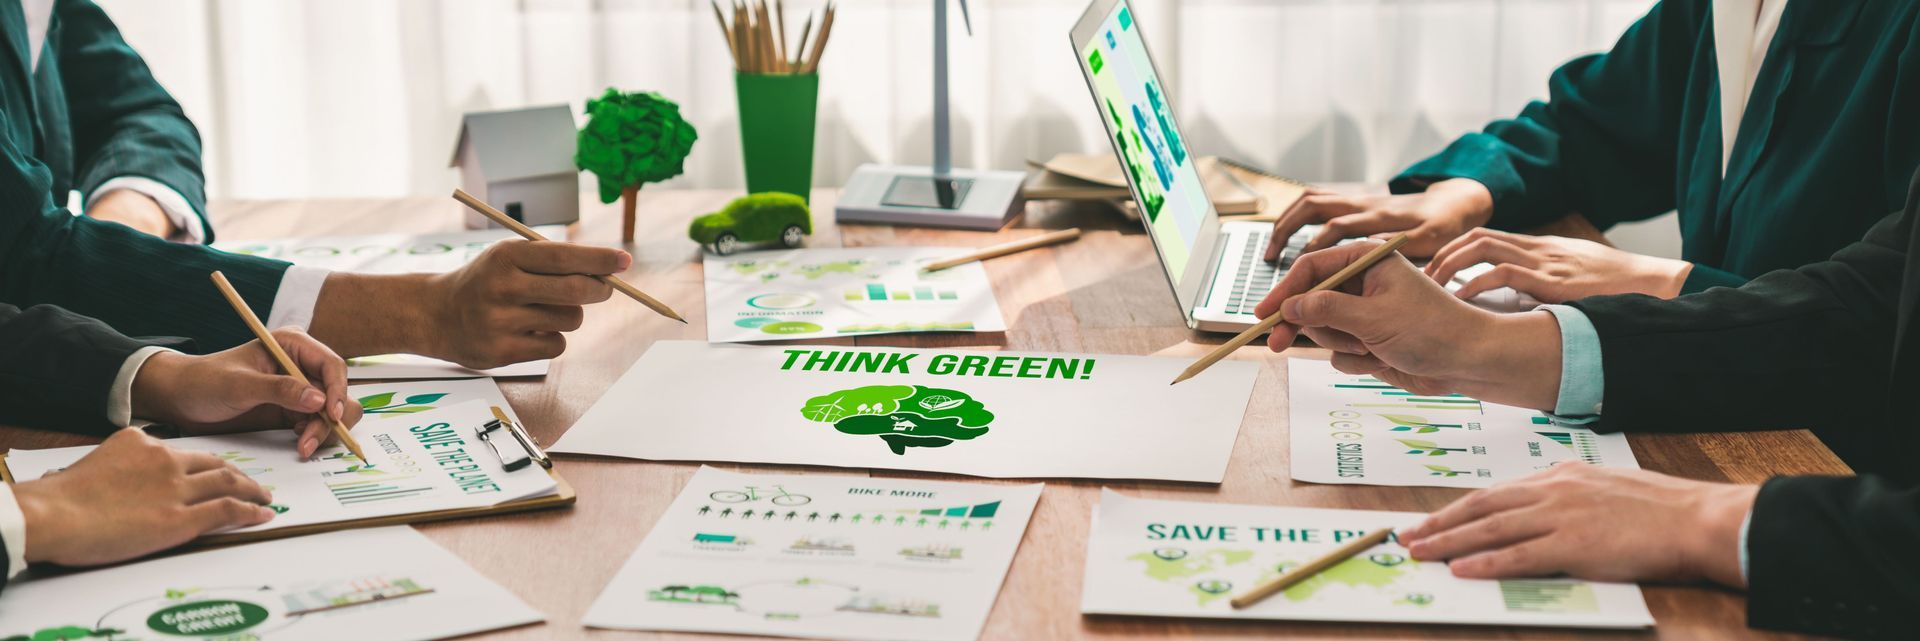 Companies that can leverage their commitment to eco-friendly practices as a selling point and attract a growing segment of environmentally conscious consumers.